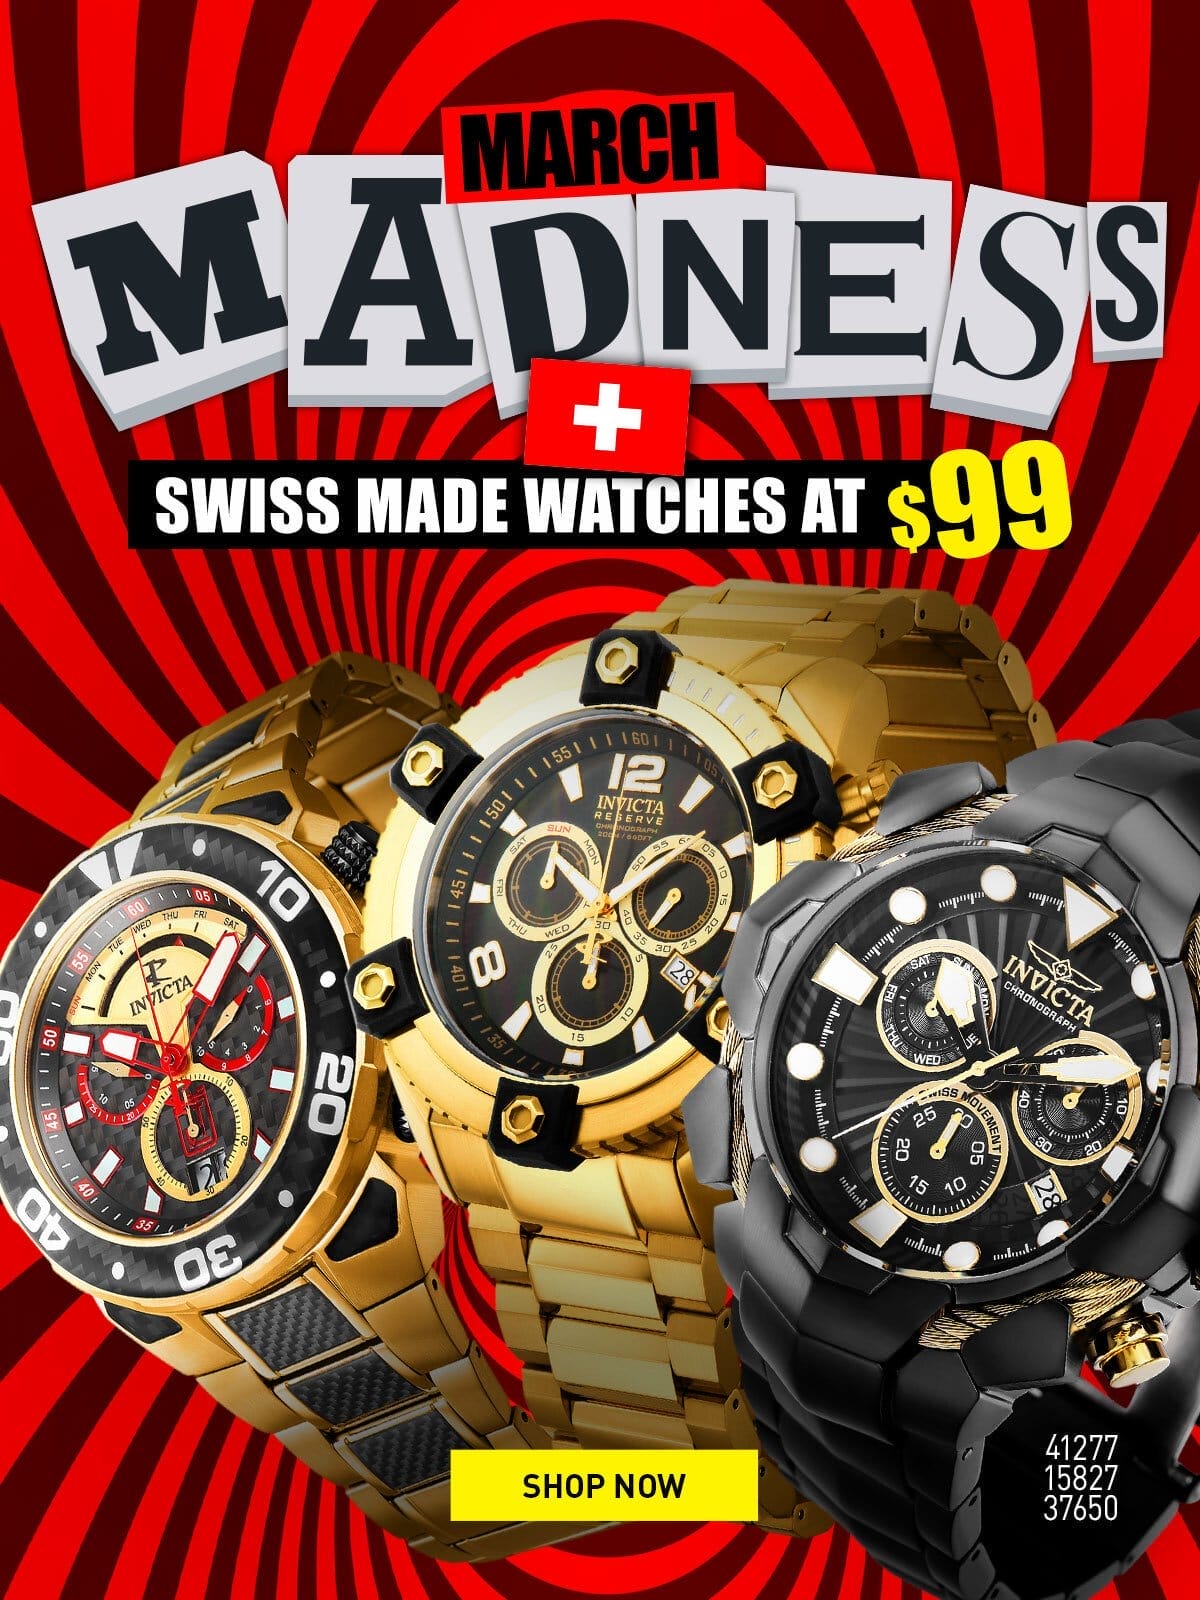 March Madness - Swiss made watches at \\$99